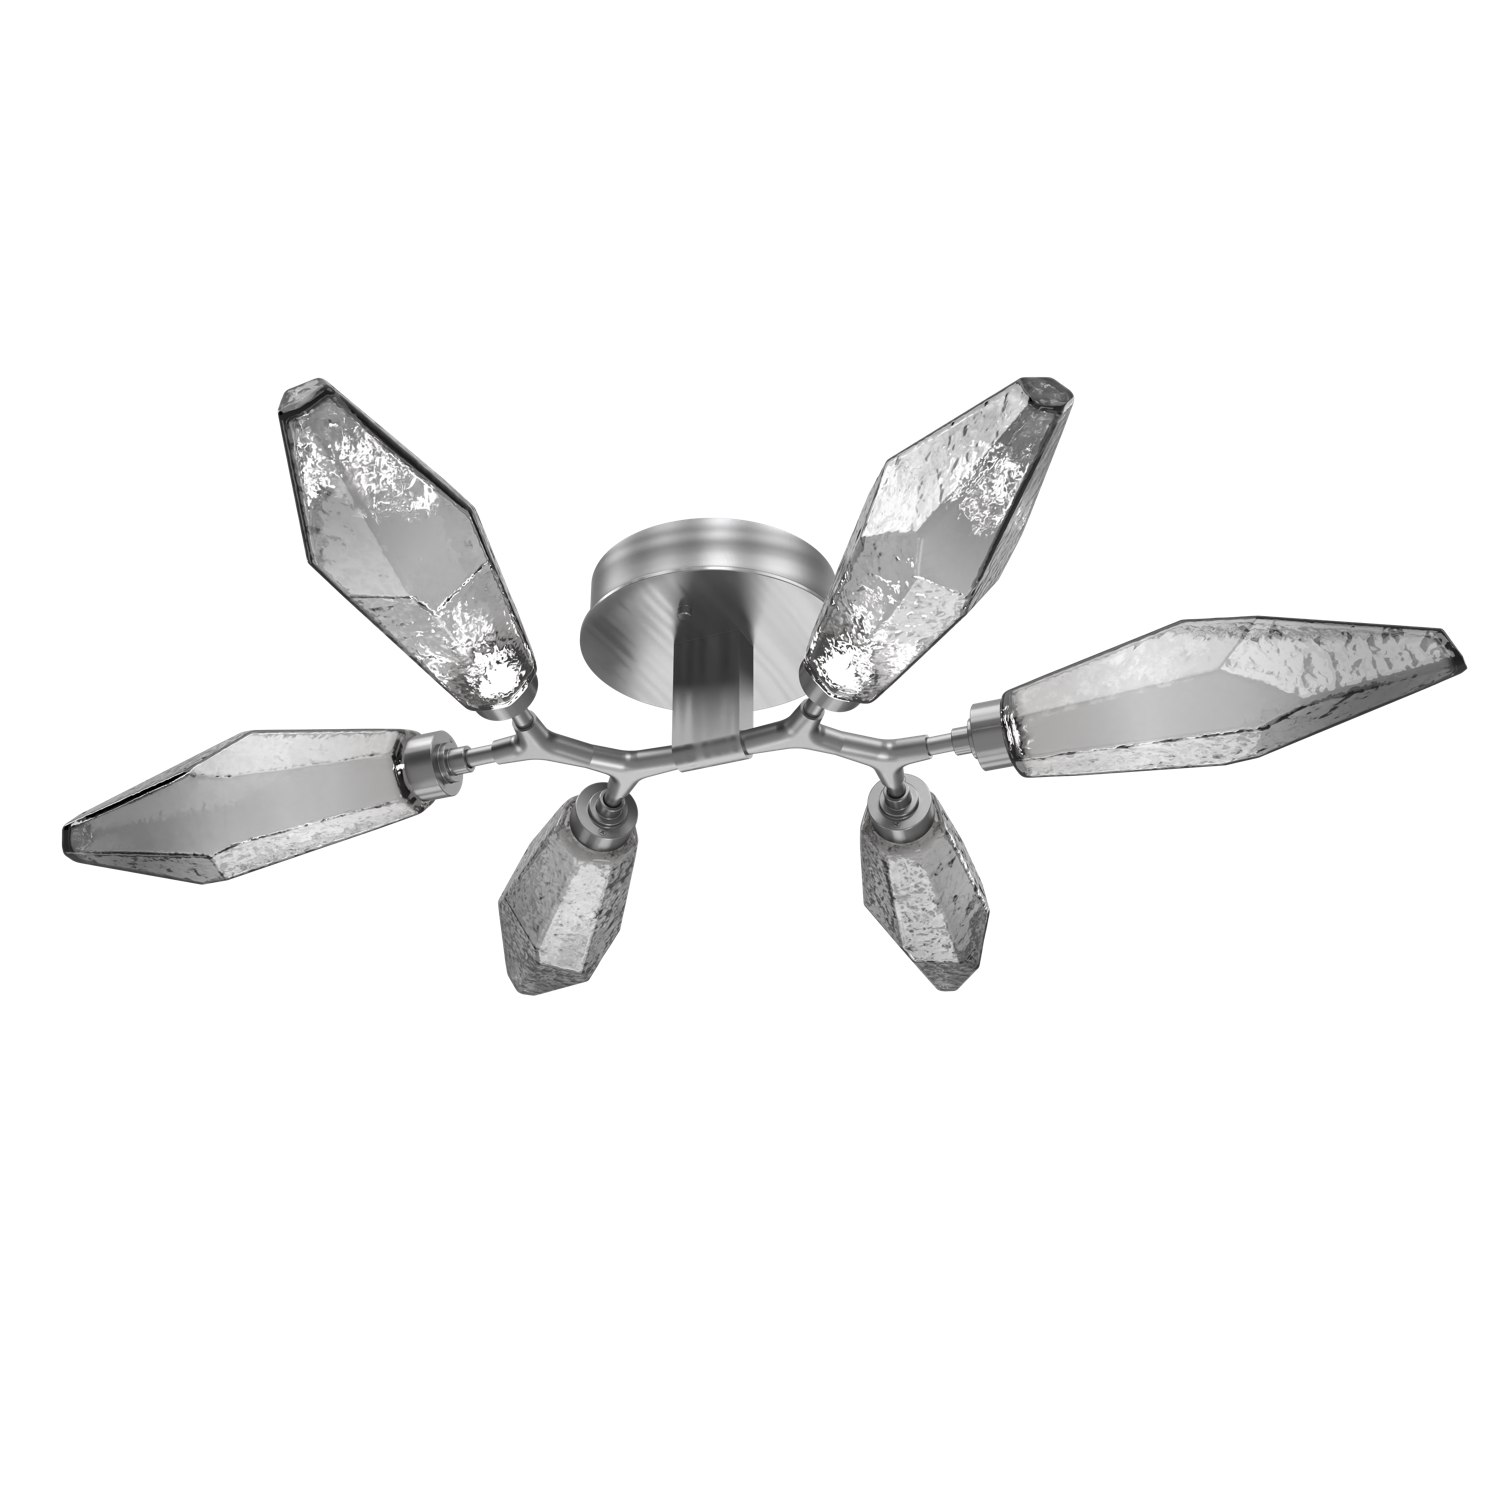 CLB0050-01-SN-CS-Hammerton-Studio-Rock-Crystal-flush-mount-light-with-satin-nickel-finish-and-chilled-smoke-glass-shades-and-LED-lamping